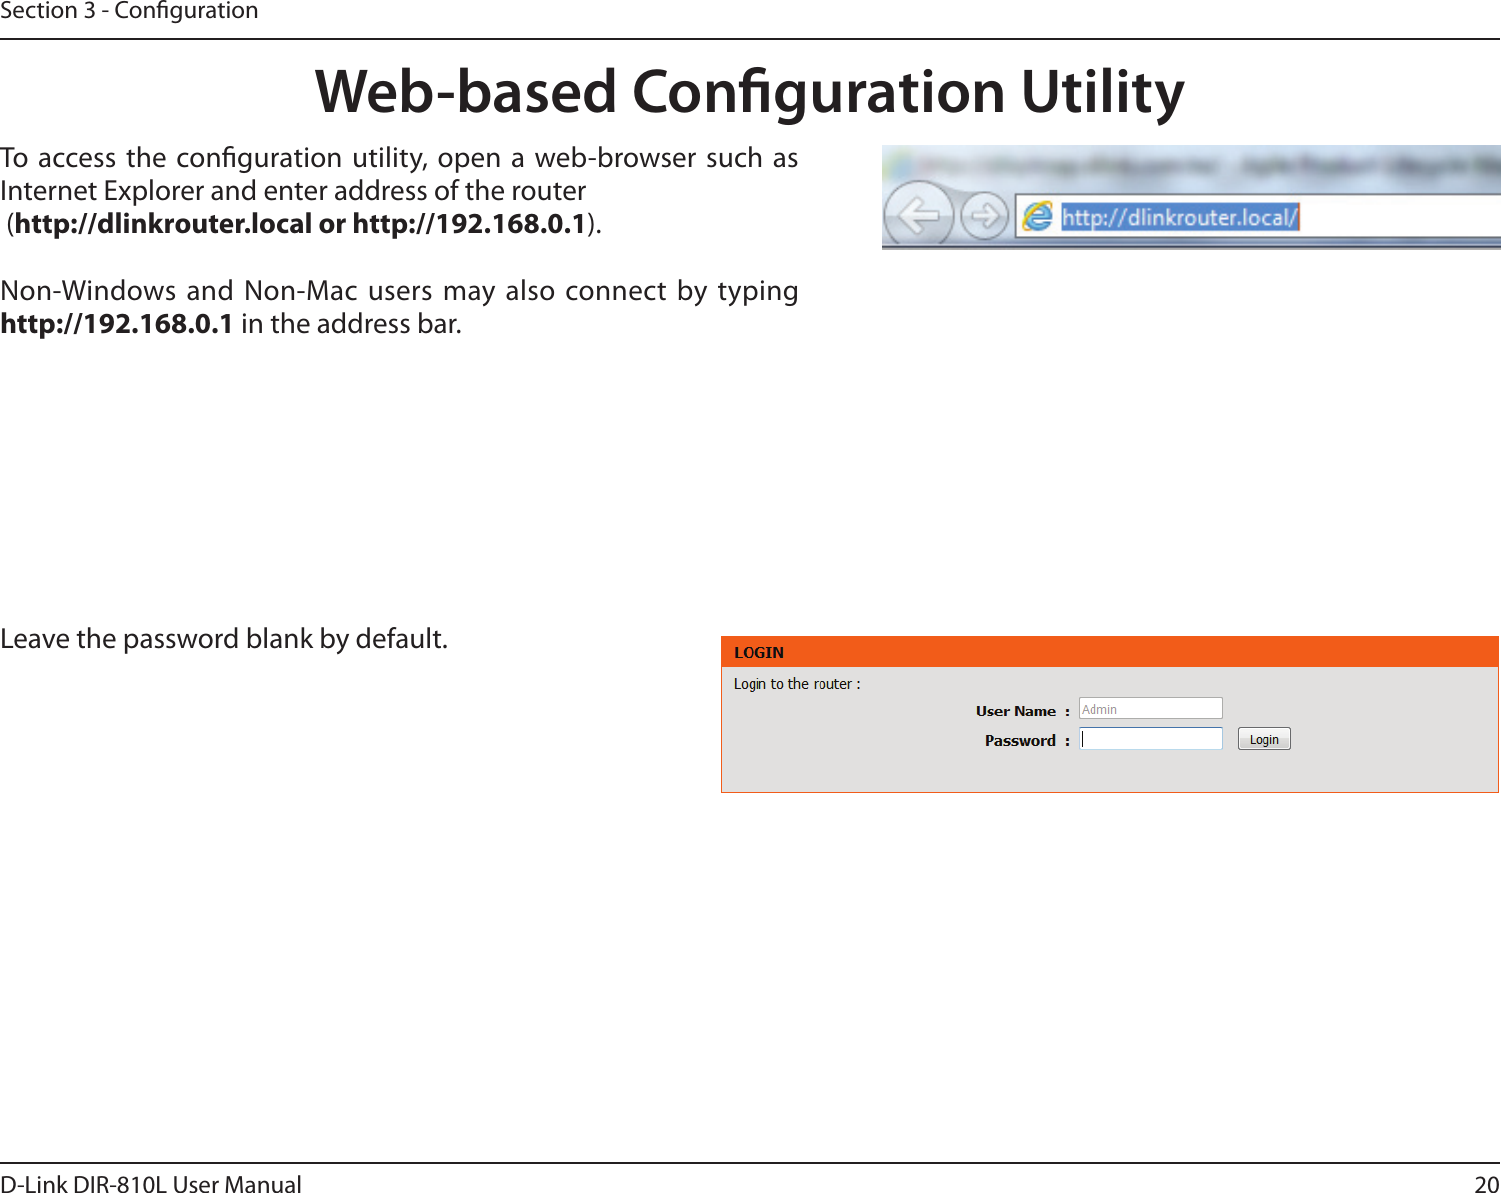 20D-Link DIR-810L User ManualSection 3 - CongurationWeb-based Conguration UtilityLeave the password blank by default.To  access the conguration utility, open a  web-browser such  as Internet Explorer and enter address of the router (http://dlinkrouter.local or http://192.168.0.1).Non-Windows and  Non-Mac users may also connect by typing http://192.168.0.1 in the address bar.